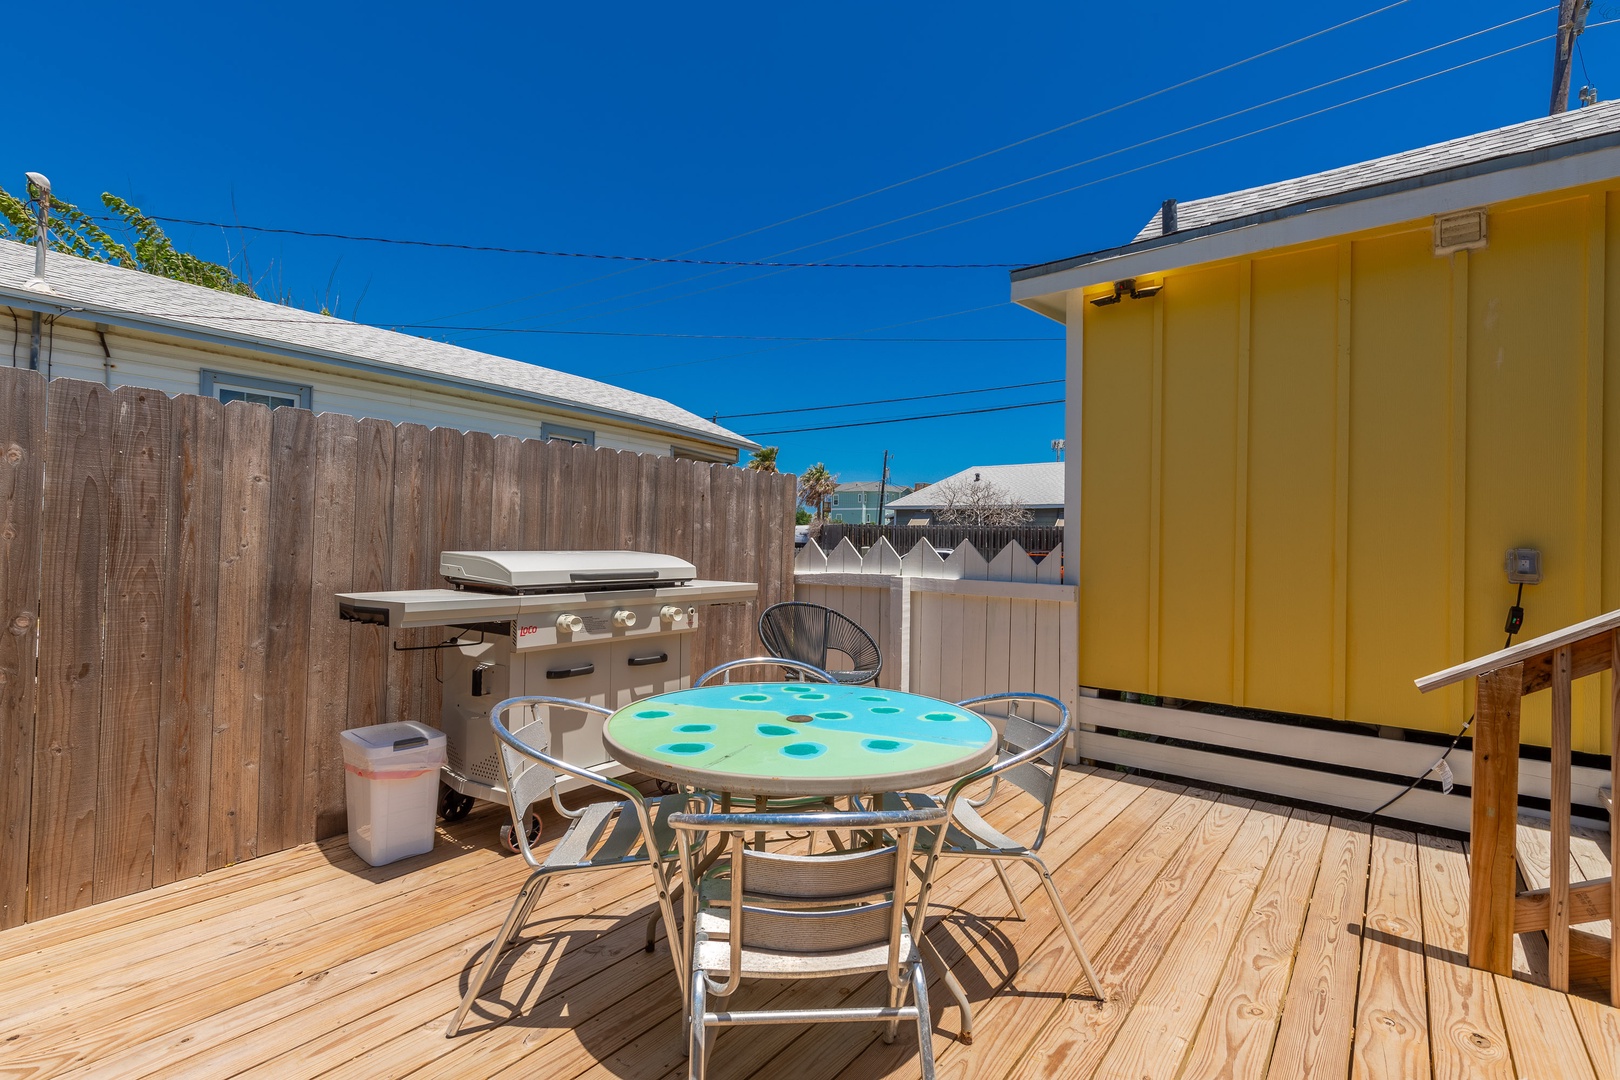 The sunny back deck is outfitted with an outdoor shower, dining set, & grill